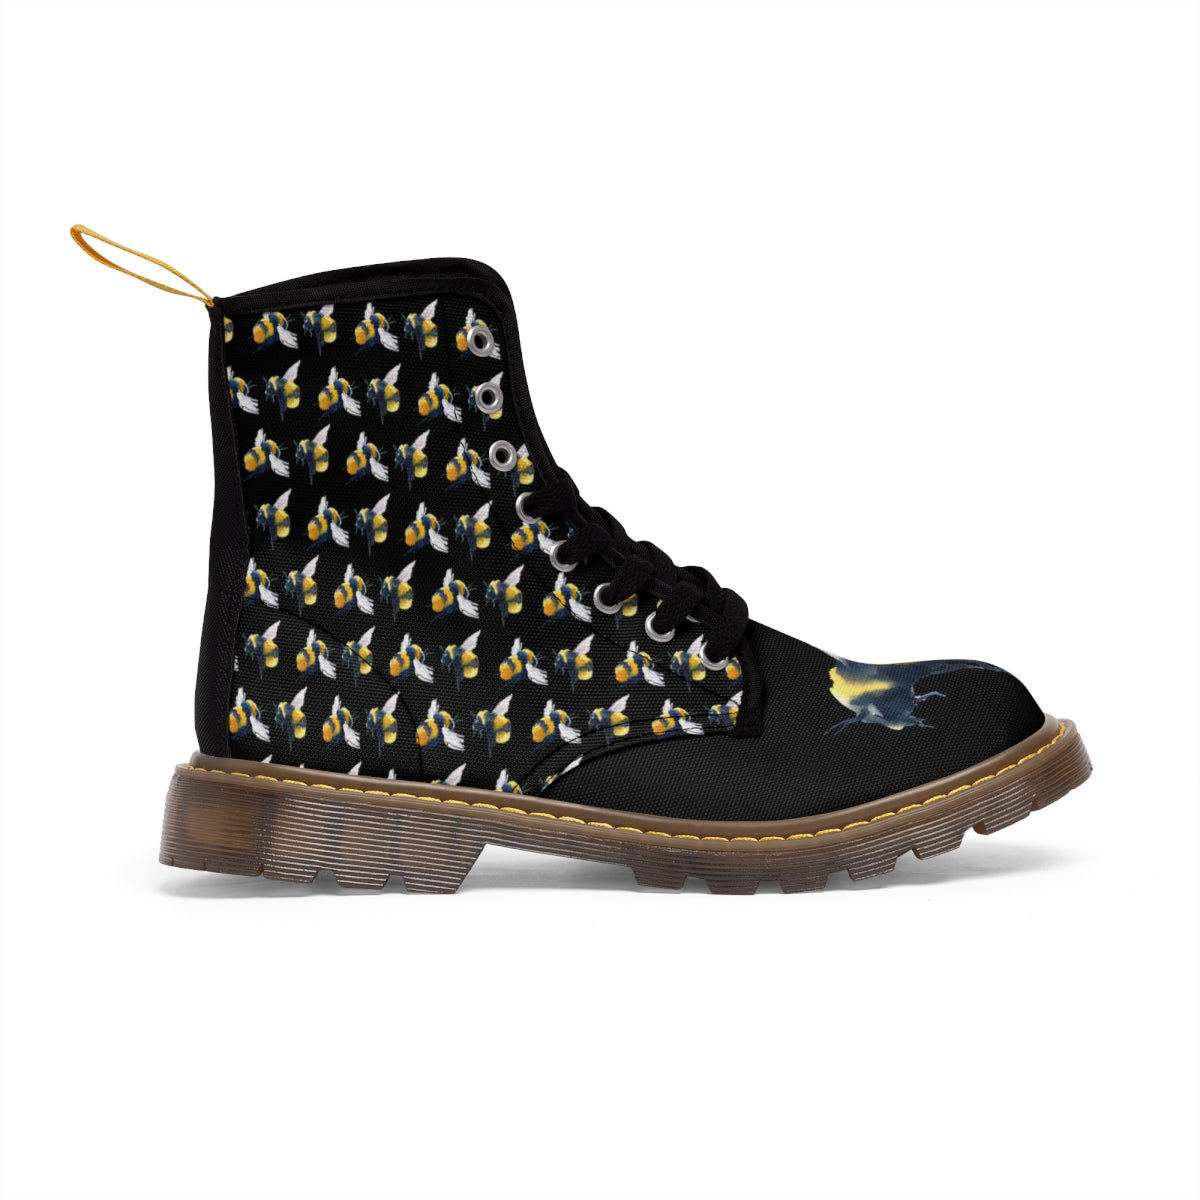 Friendly Flying Bees Men's Black Canvas Boots Shoes Bee boots combat boots gift for bee lover gift for him Mens boots mens fashion boots mens shoes Shoes unique mens boots vegan boots vegan combat boots